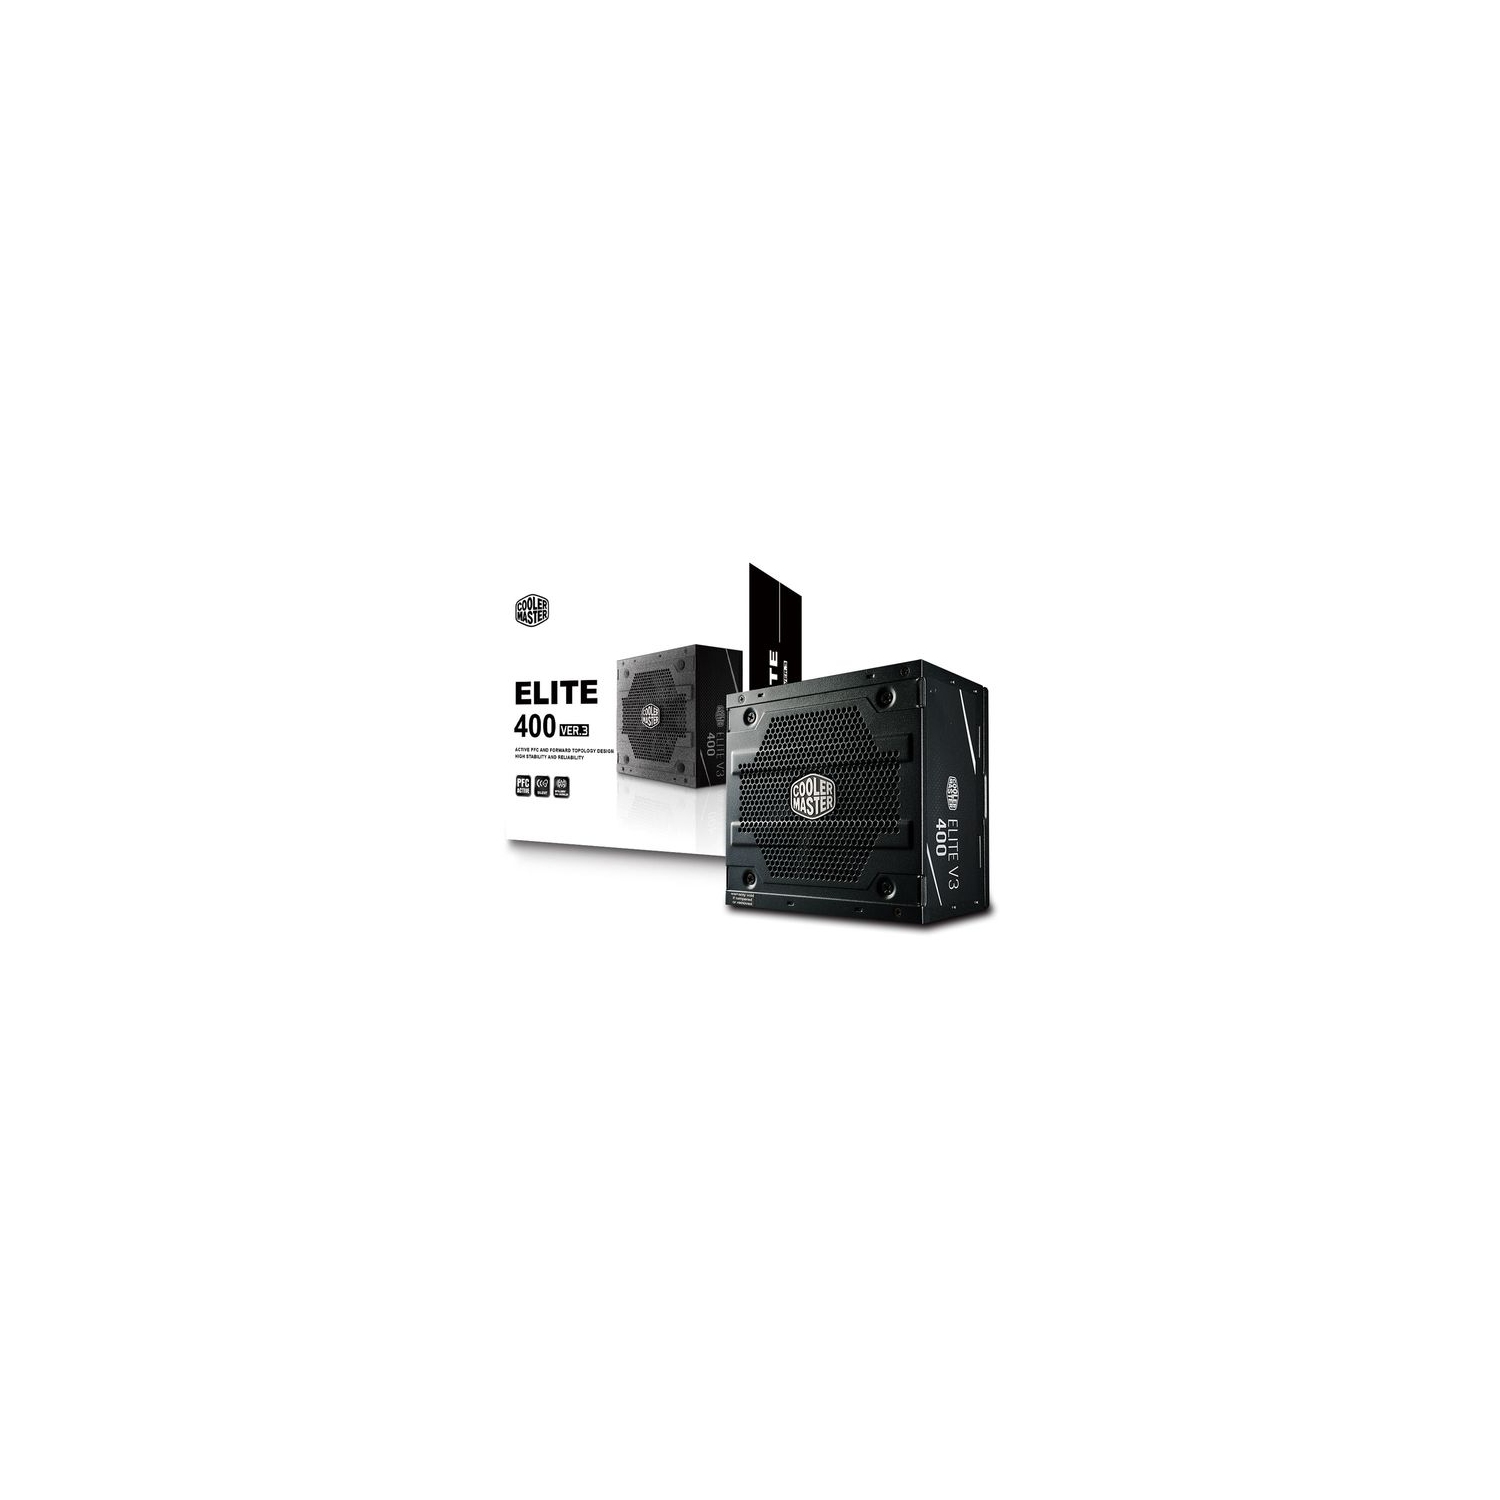 Cooler Master Elite 400W Ver.3 ATX Power Supply with quiet 120mm (New)